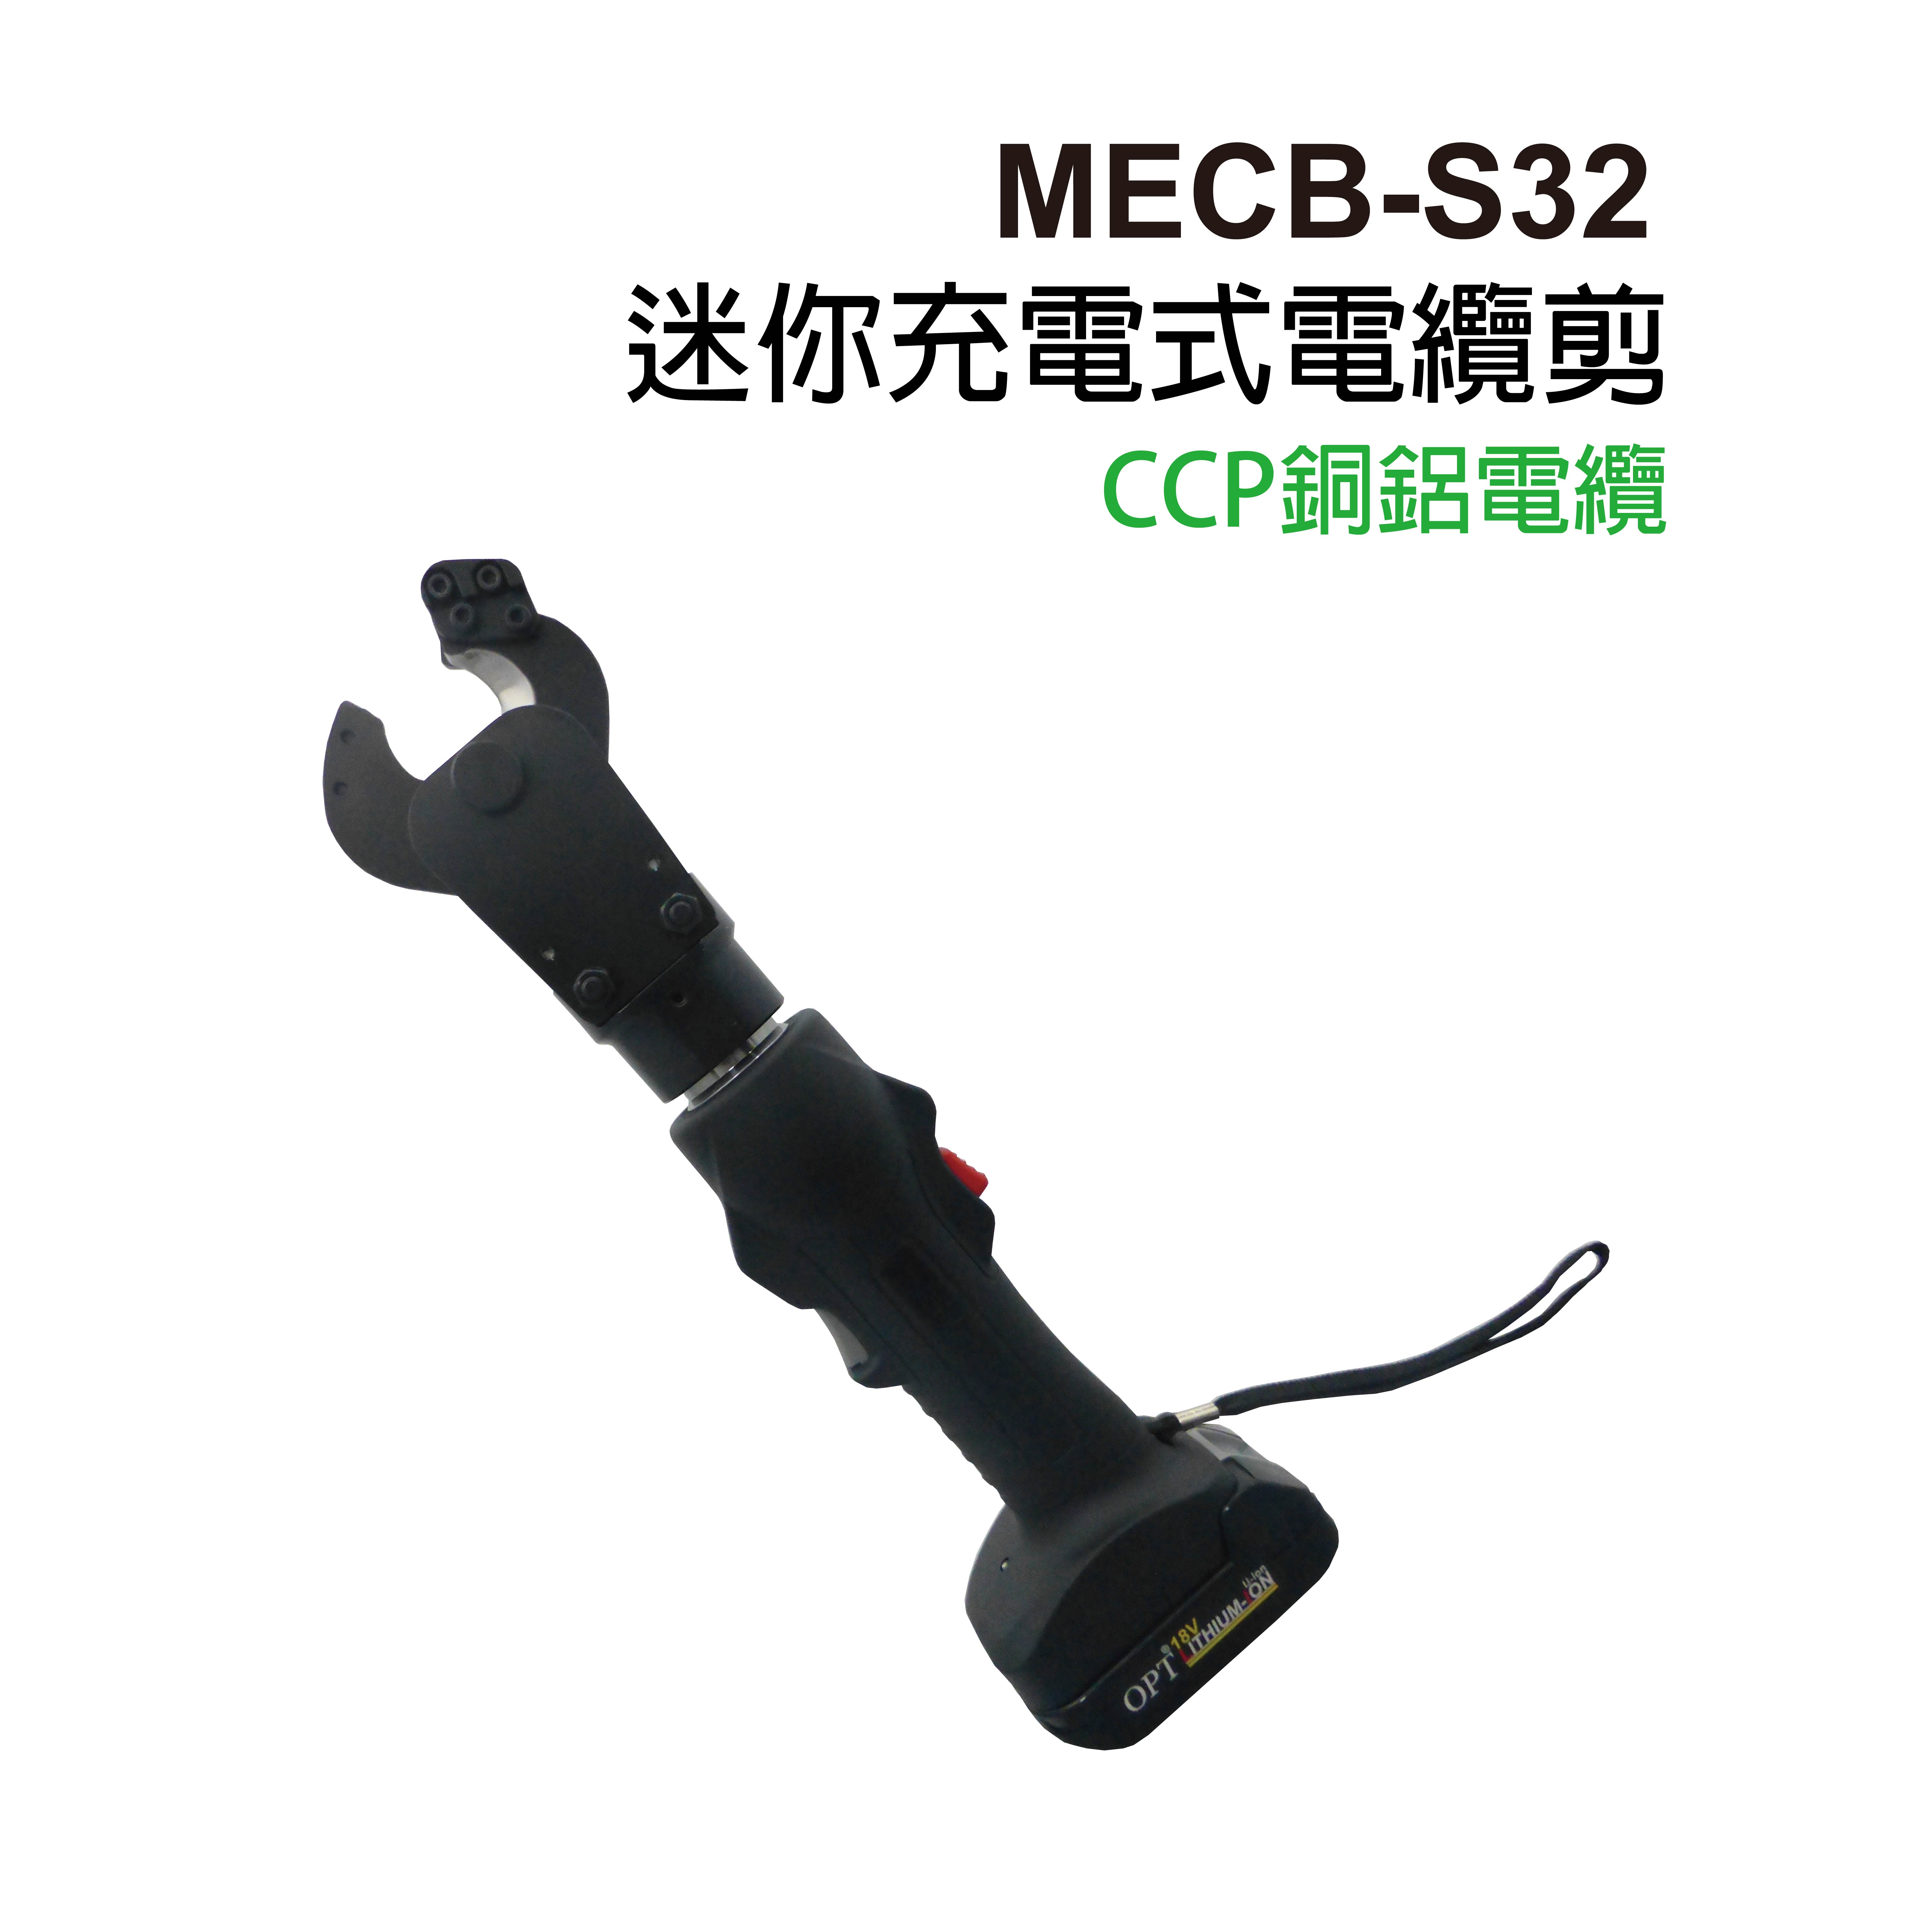 MECB-S32 CORDLESS HYDRAULIC CABLE CUTTERS-MECB-S32